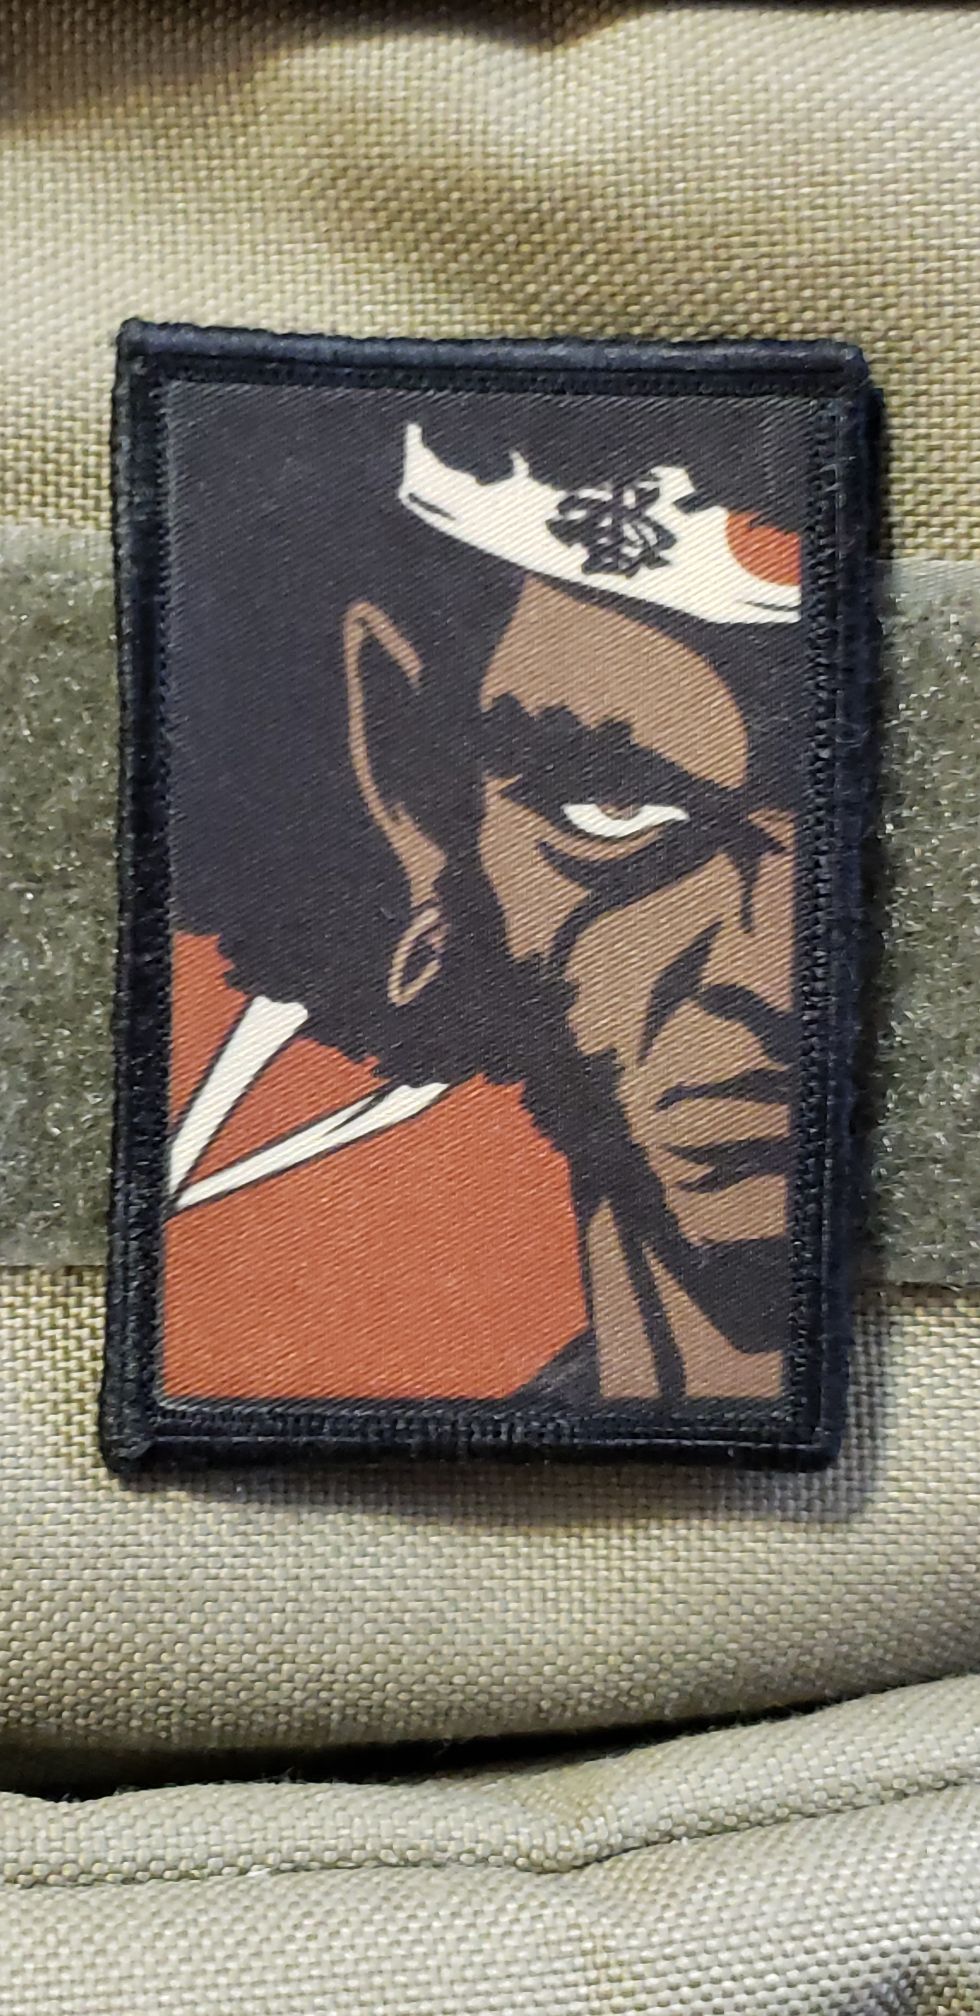 Afro Samurai Morale Patch Morale Patches Redheaded T Shirts 